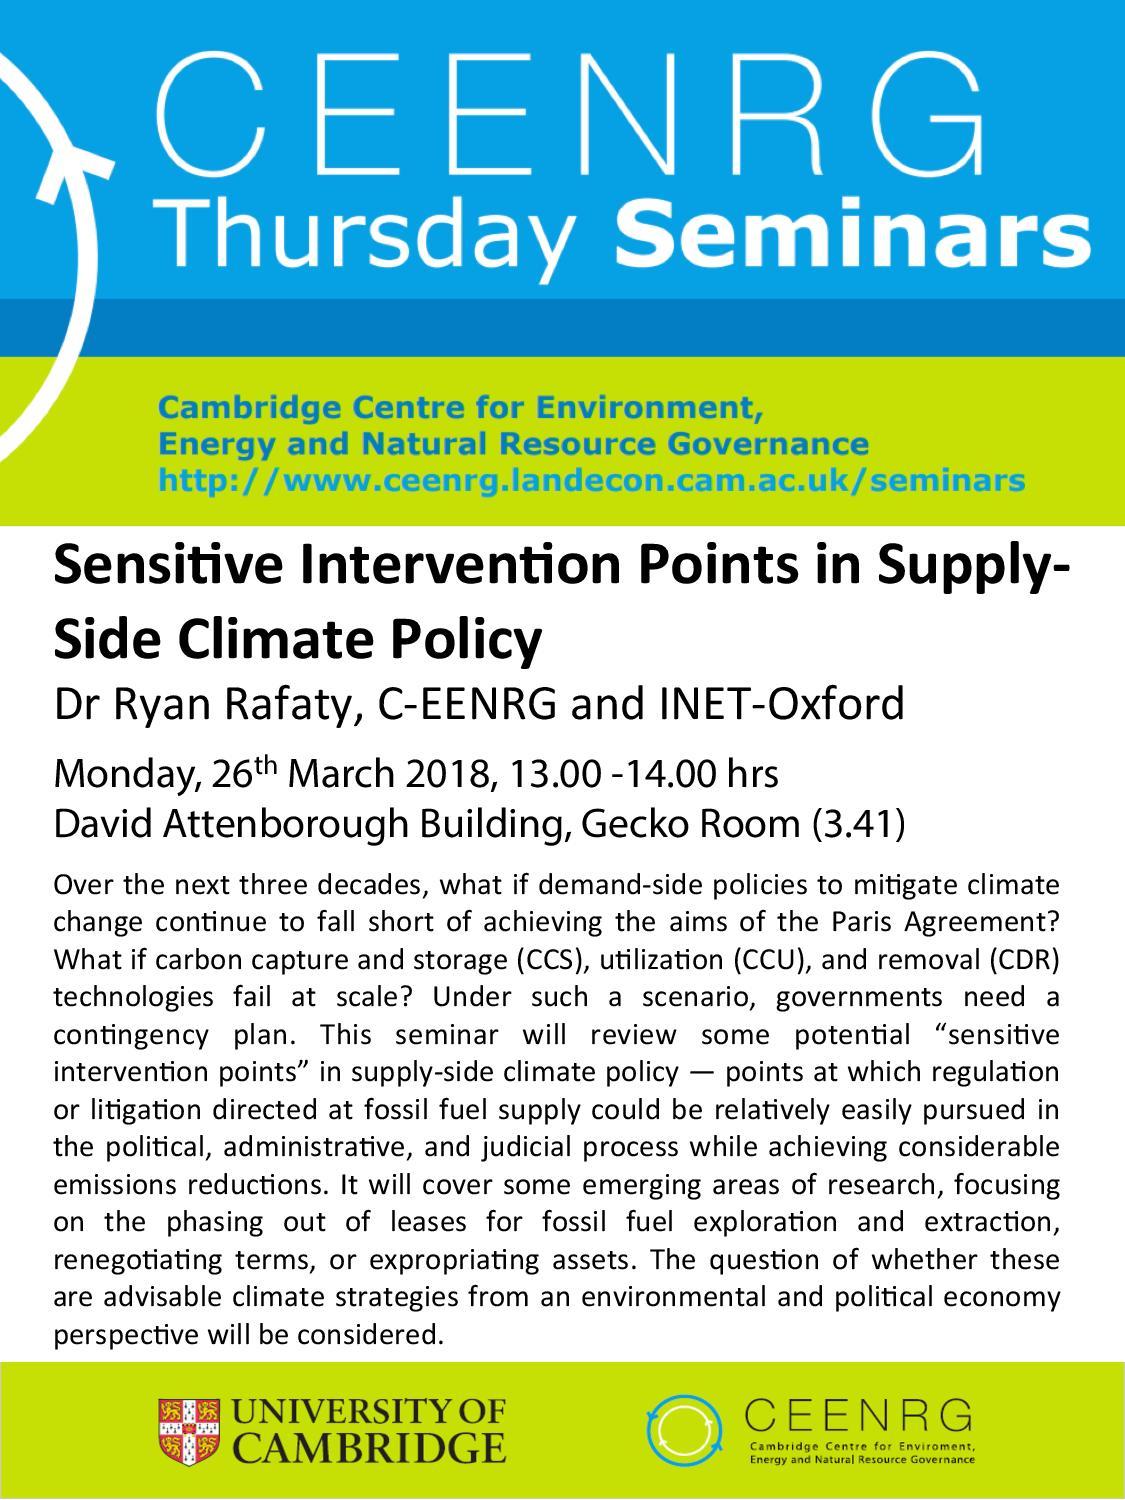 CEENRG Seminar on Sensitive Intervention Points in Supply-Side Climate Policy